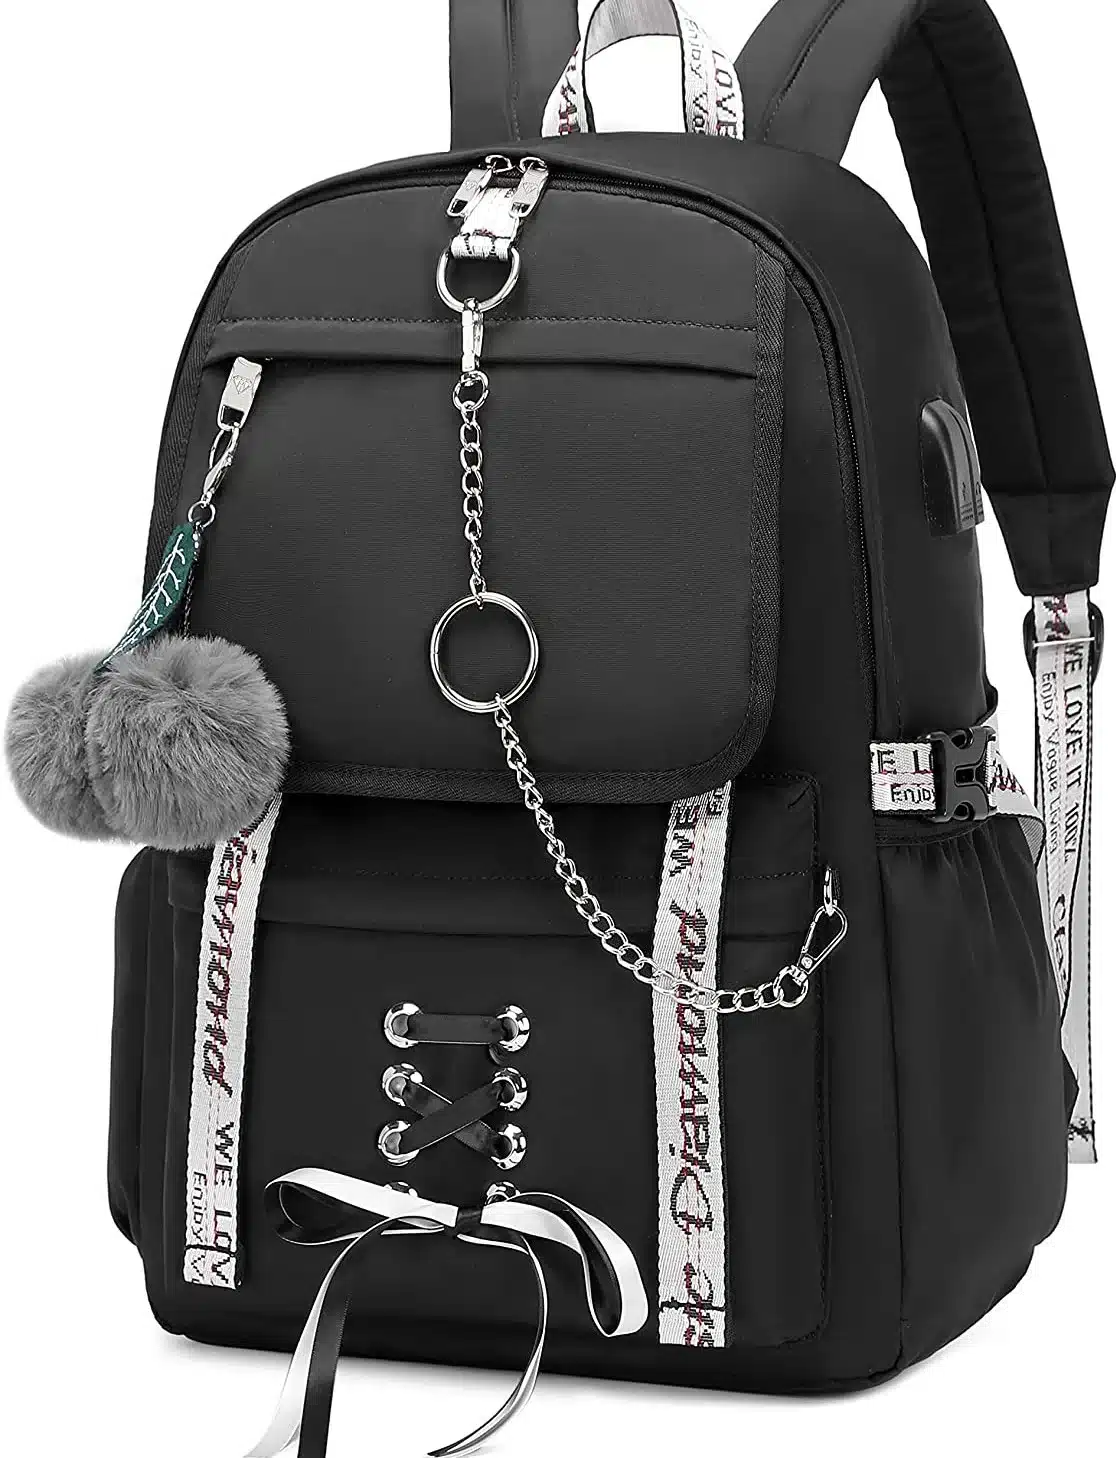 What is the features of Aesthetic Backpack?